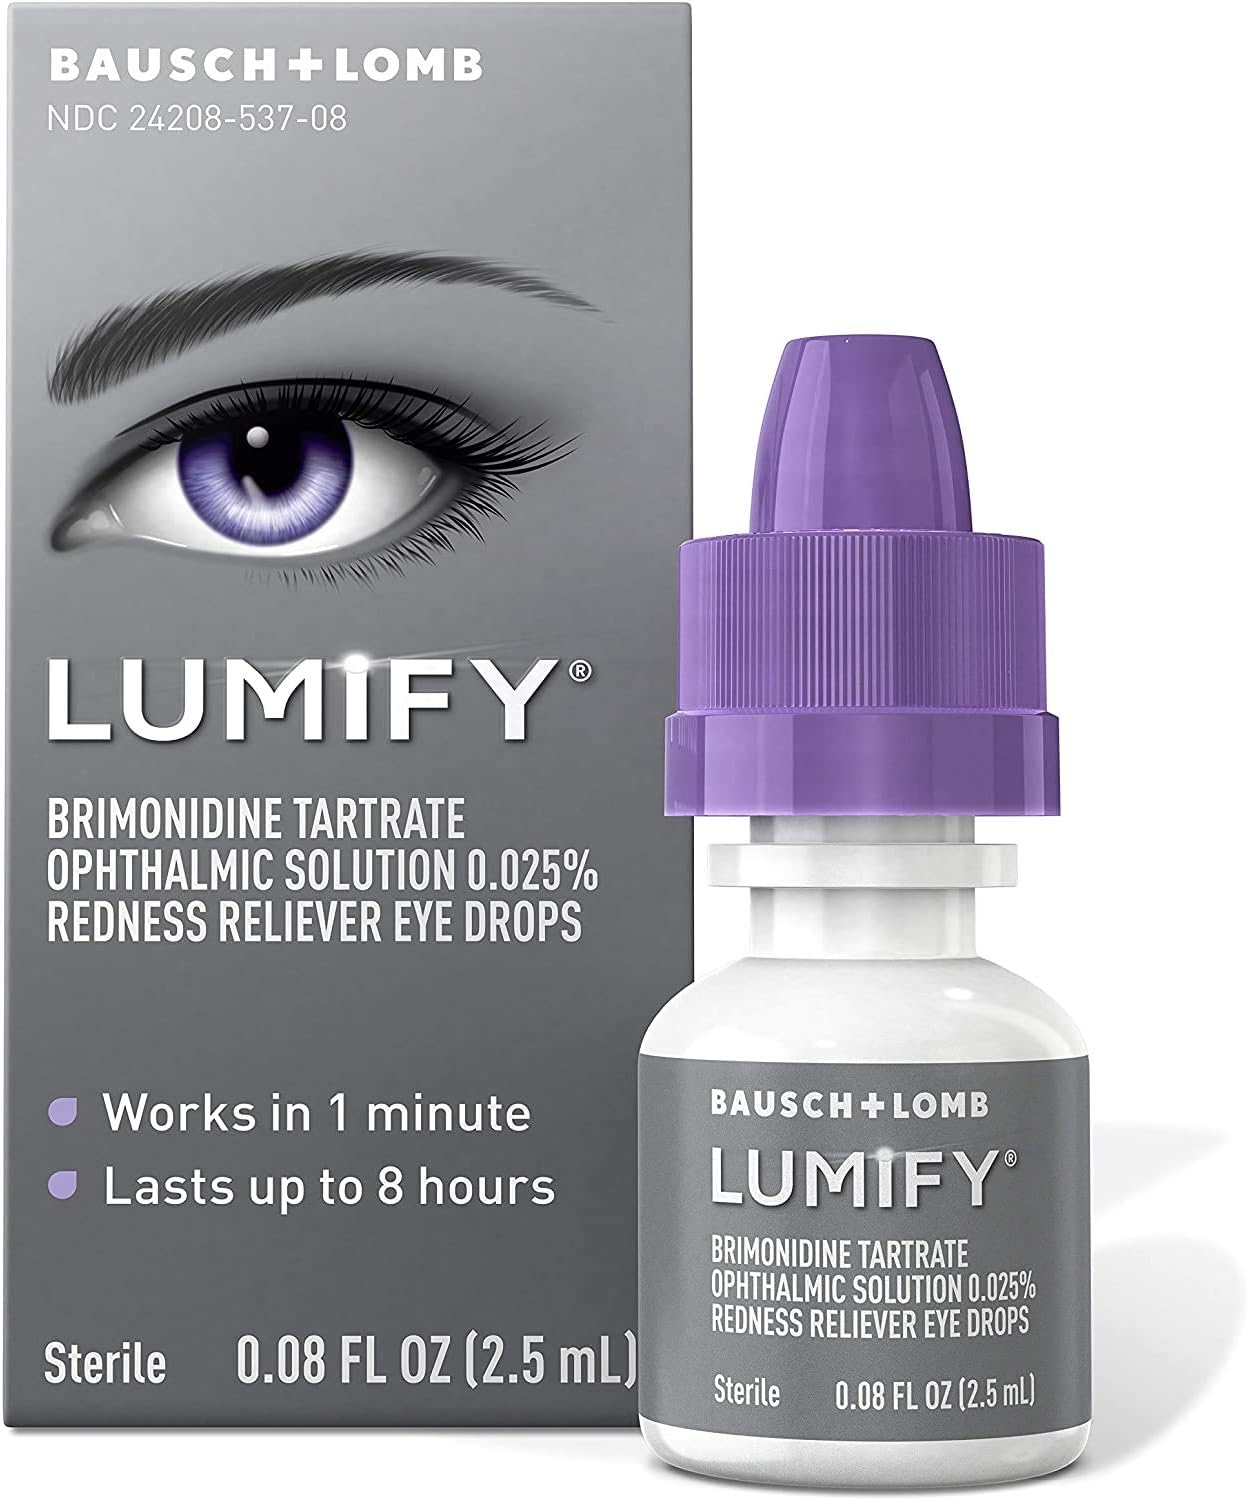 Bausch + Lomb Lumify Redness Reliever Eye Drops, 0.08 2